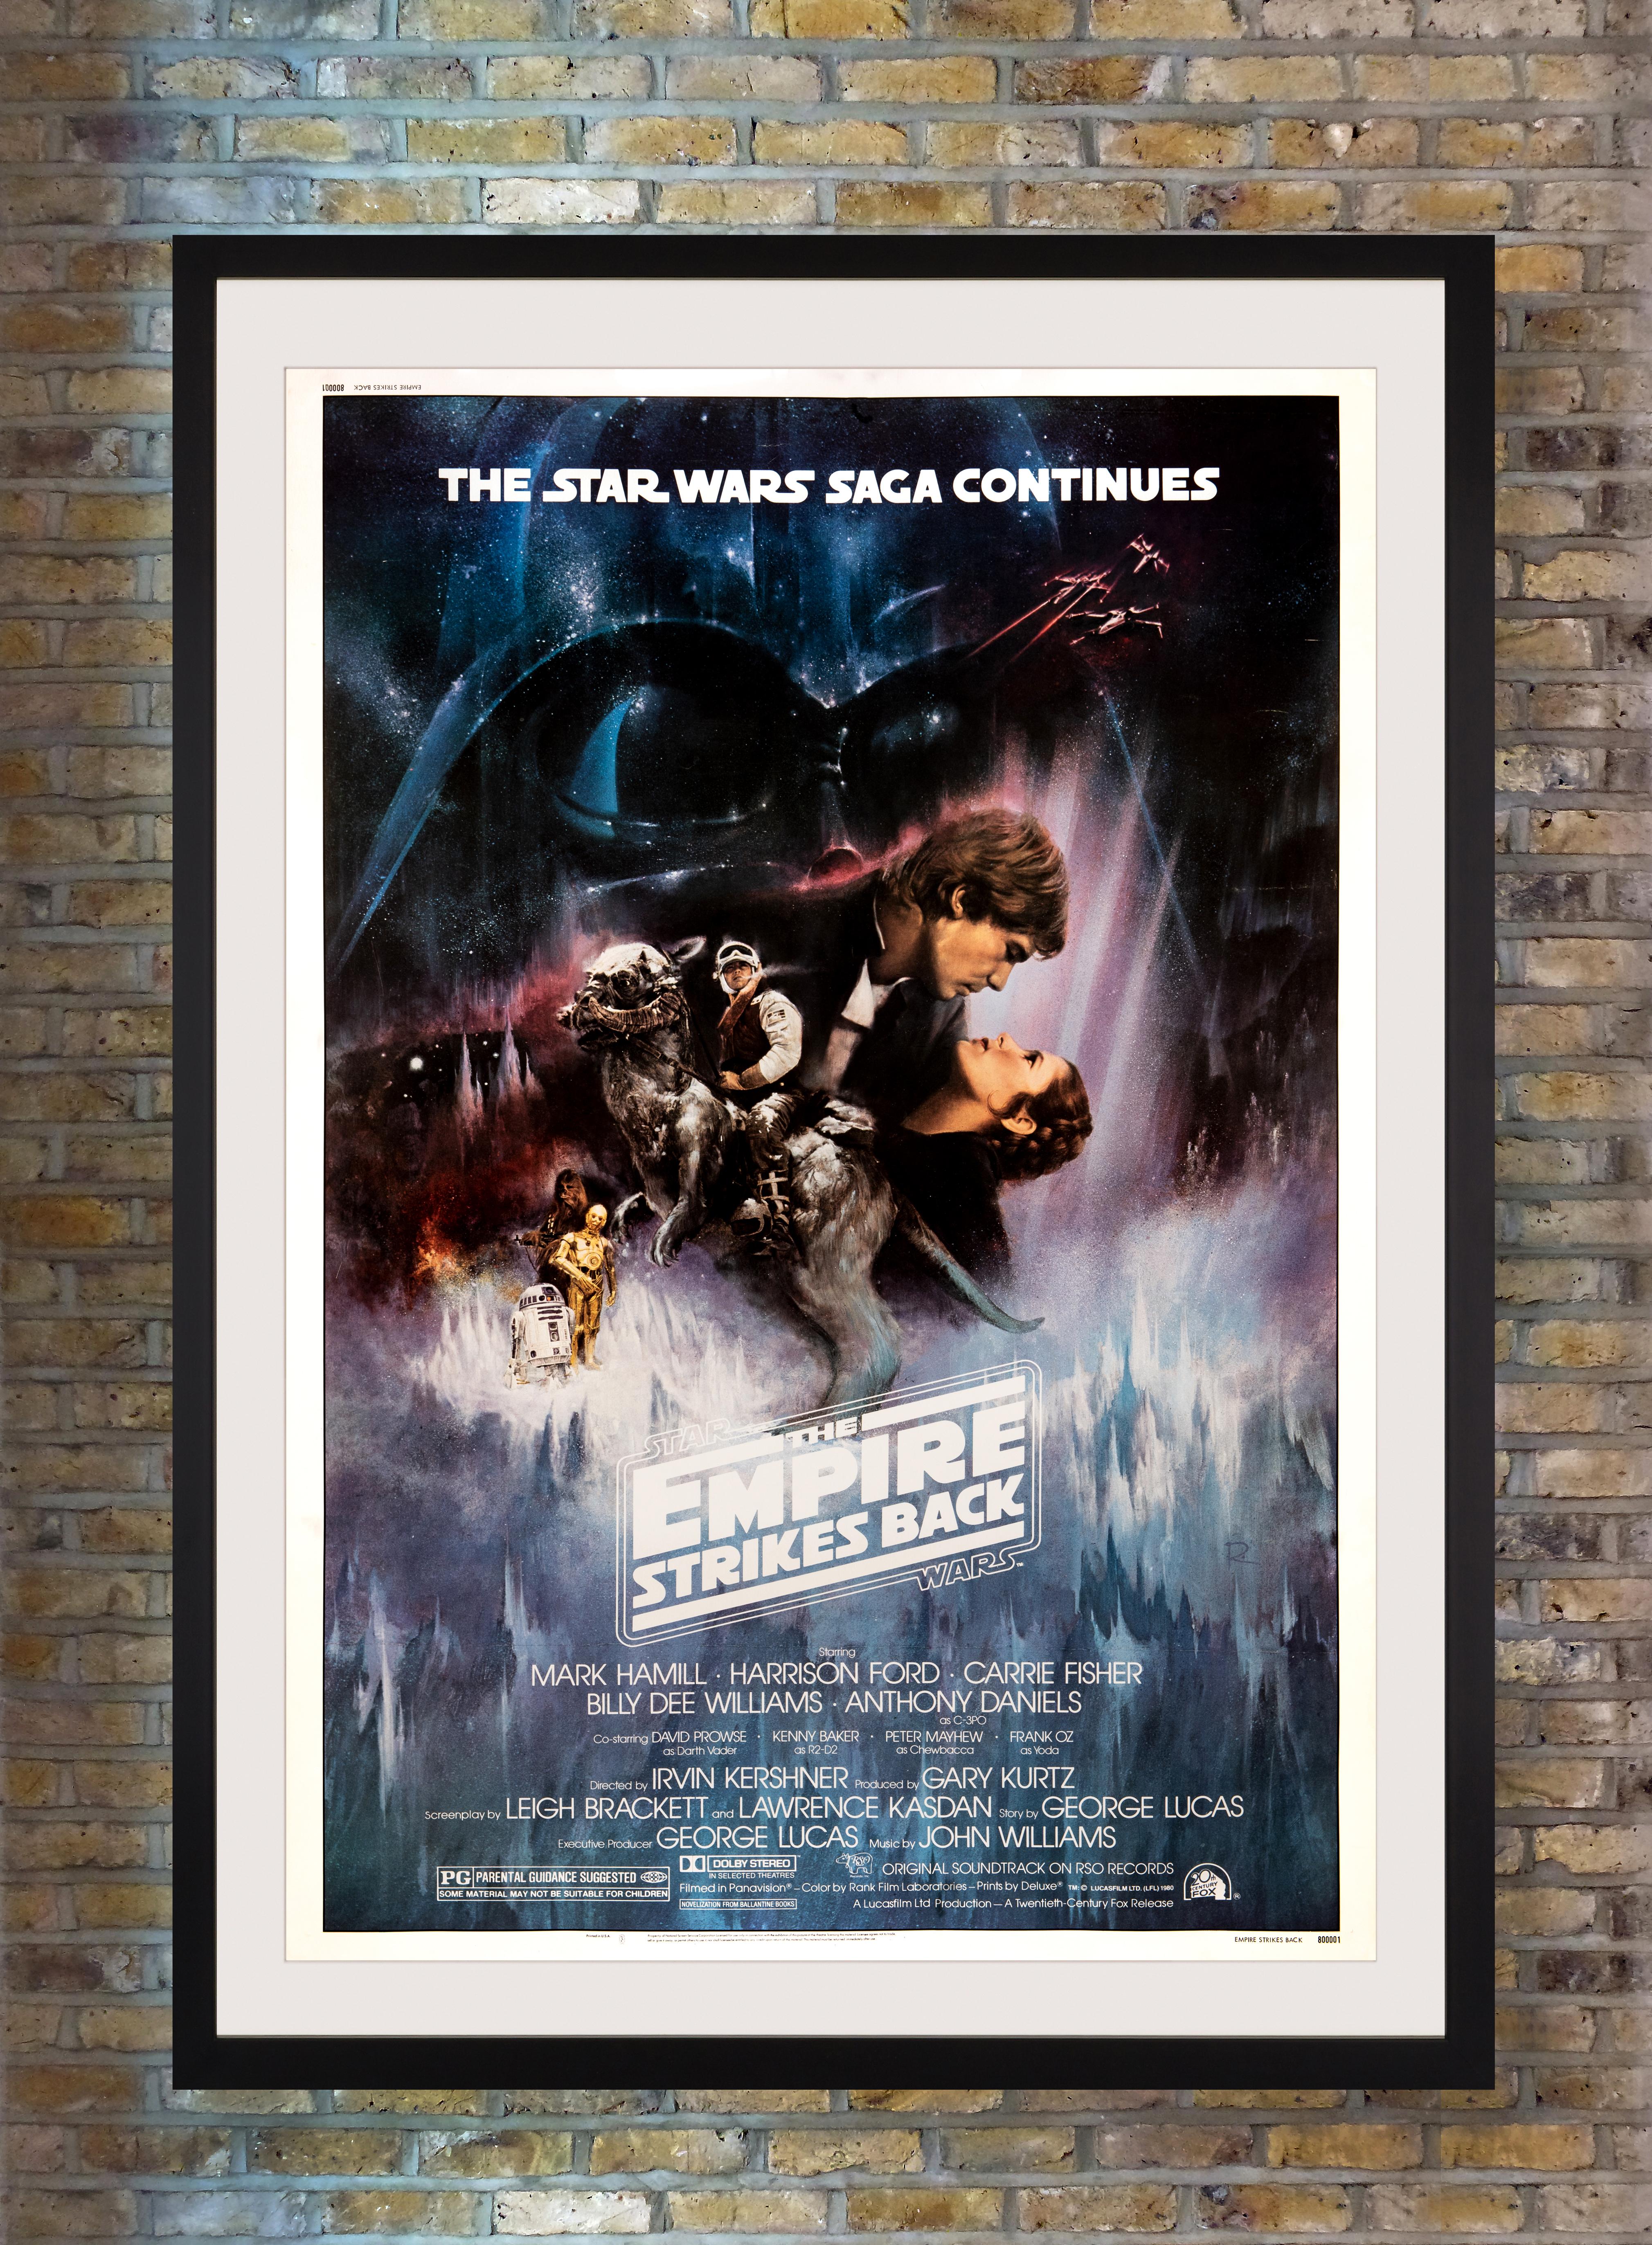 A rare example of a sequel that transcends the original, Lucasfilm's 'The Empire Strikes Back' was the highest grossing film of 1980 and has come to be regarded as the best film in the original 'Star Wars' trilogy. The epic space saga continued as